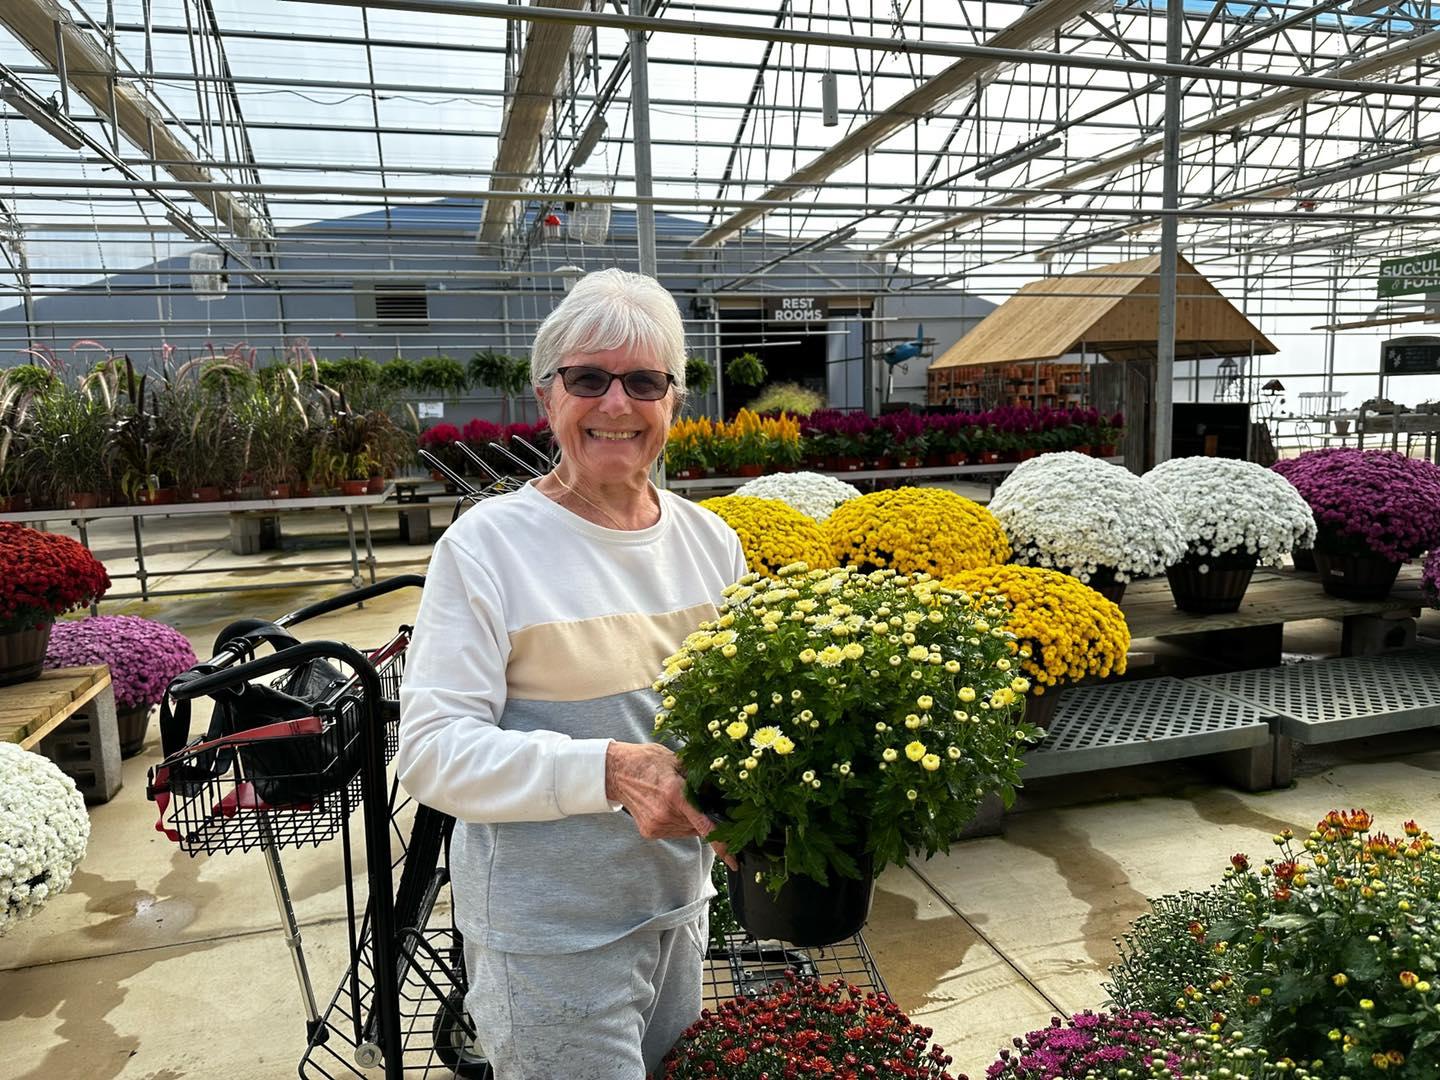 A smiling person holding a potted plant at a garden center with colorful flowers around